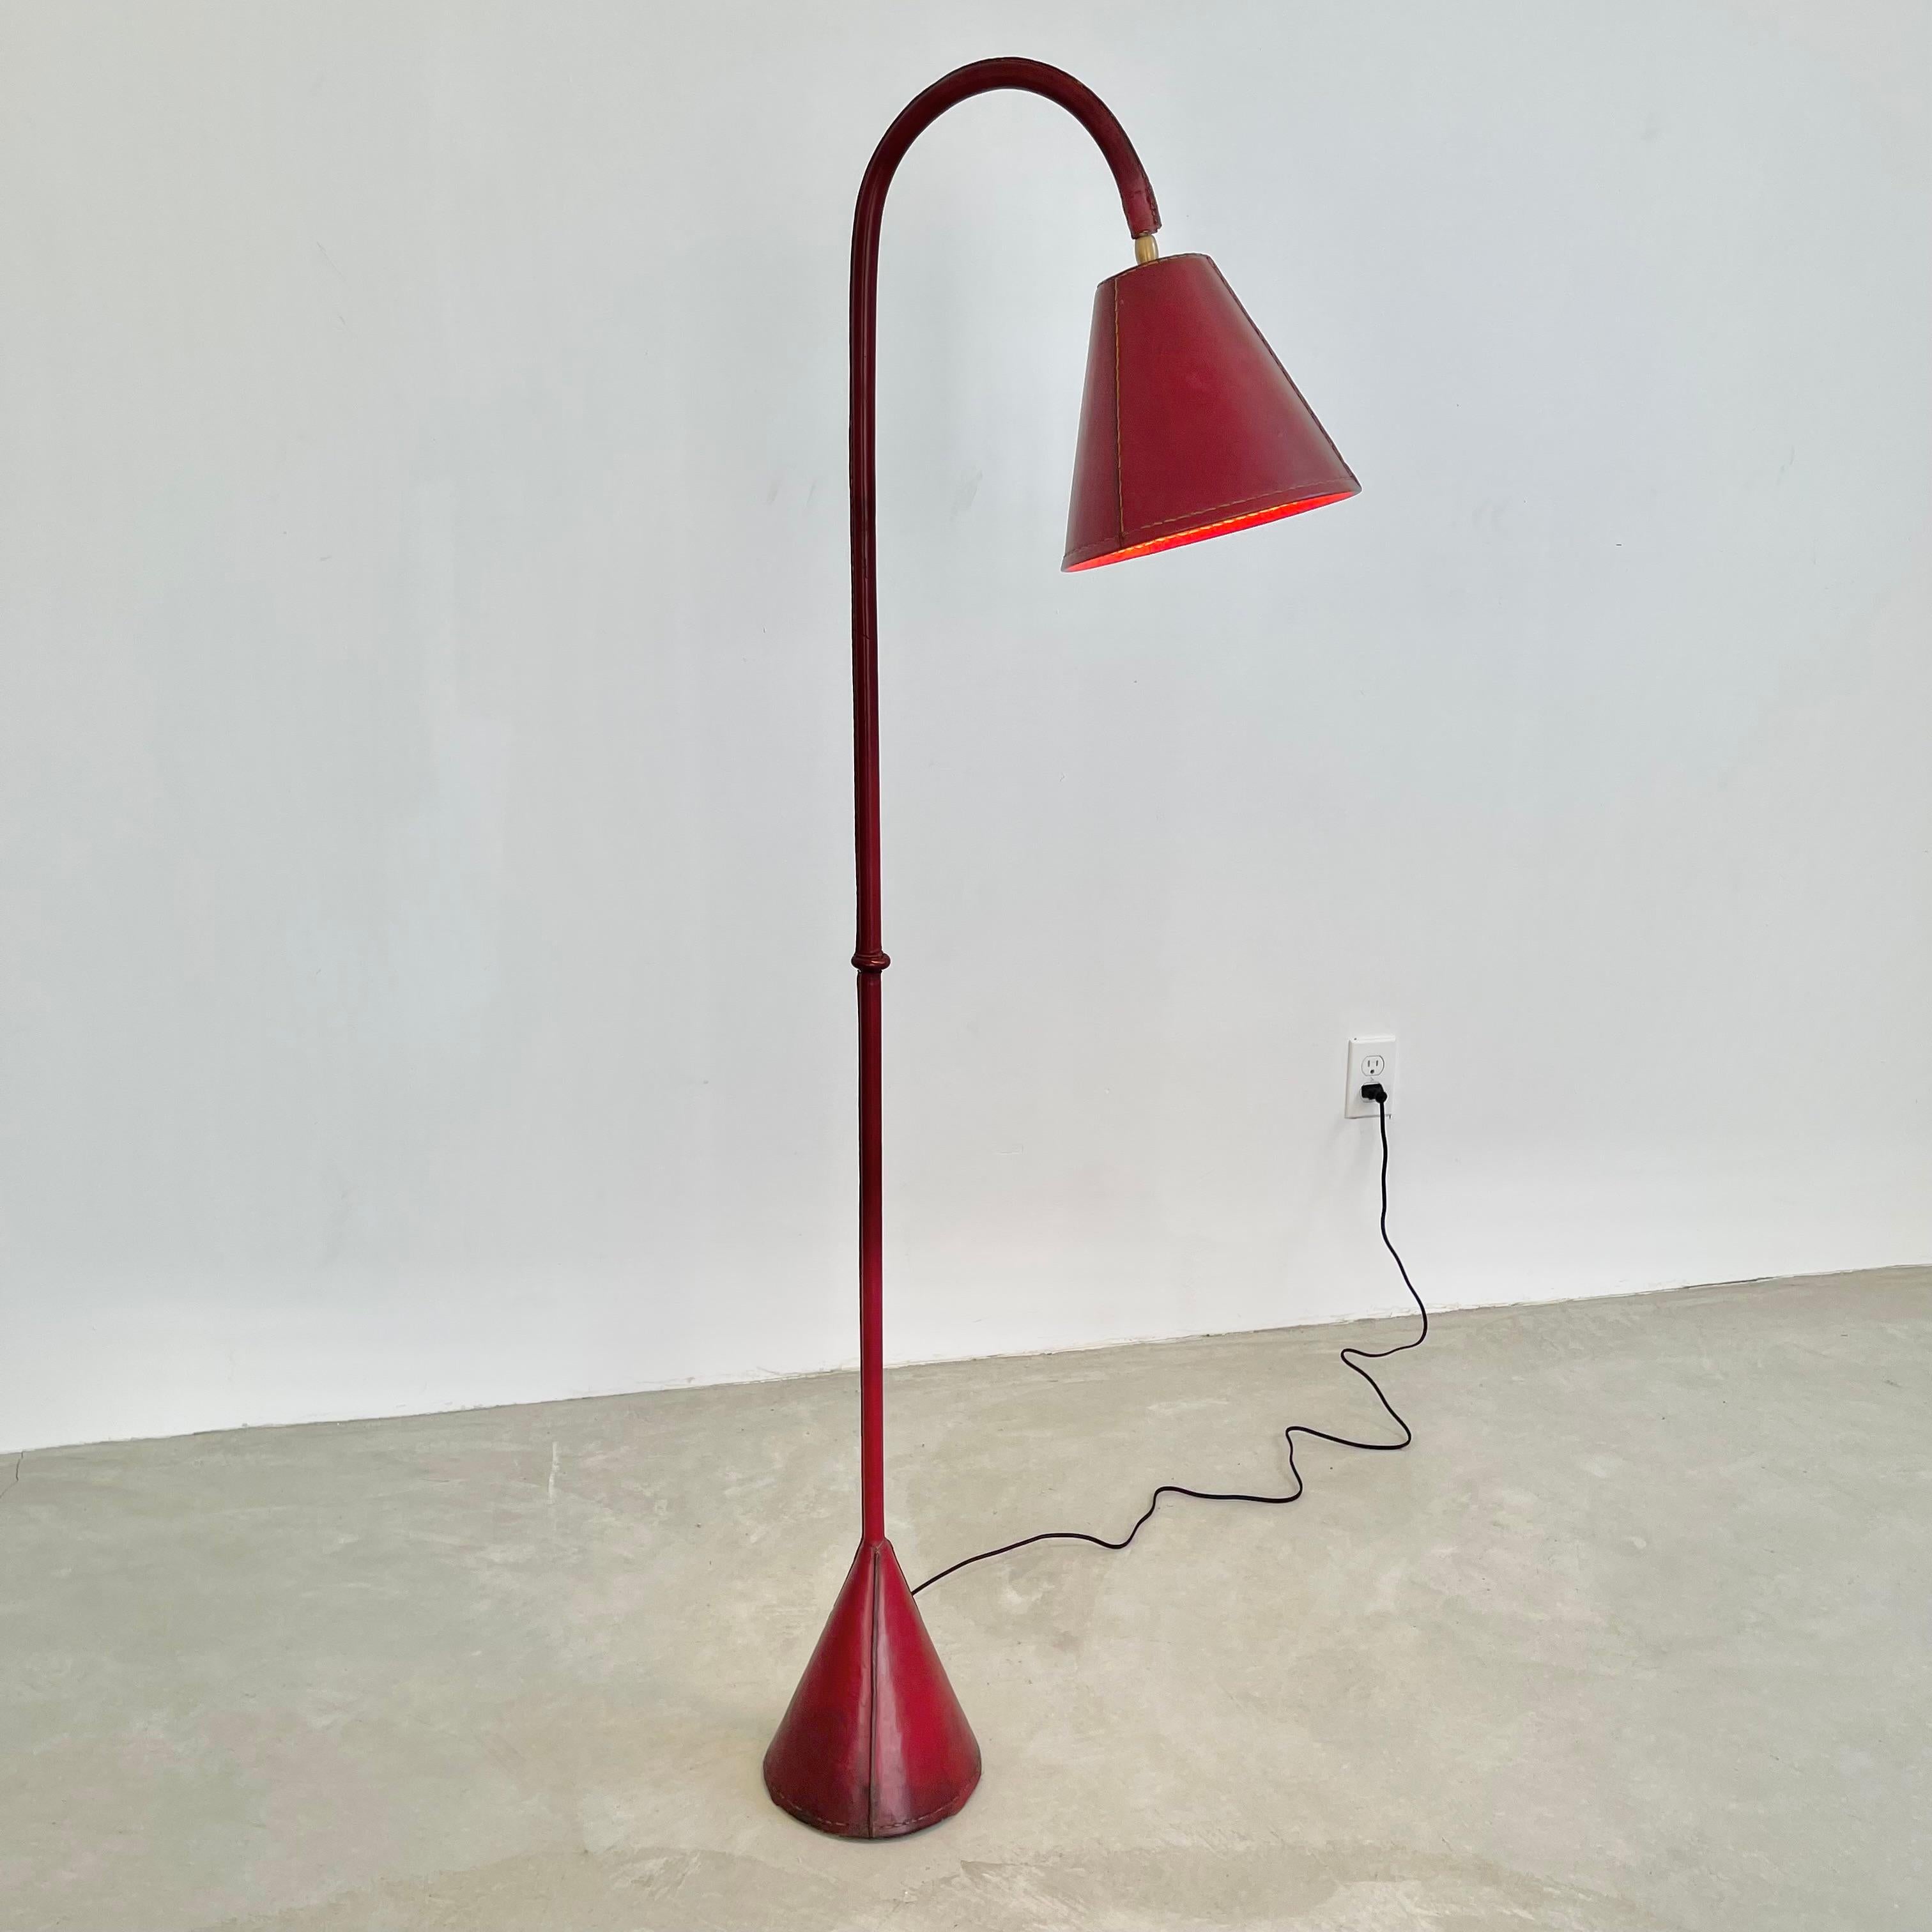 Handsome leather arched floor lamp by Spanish design house, Valenti. Based in Barcelona and founded over 200 years ago, Valenti has deep roots in high end furniture and elegant designs. Made in the 1950s this floor lamp is completely wrapped in a